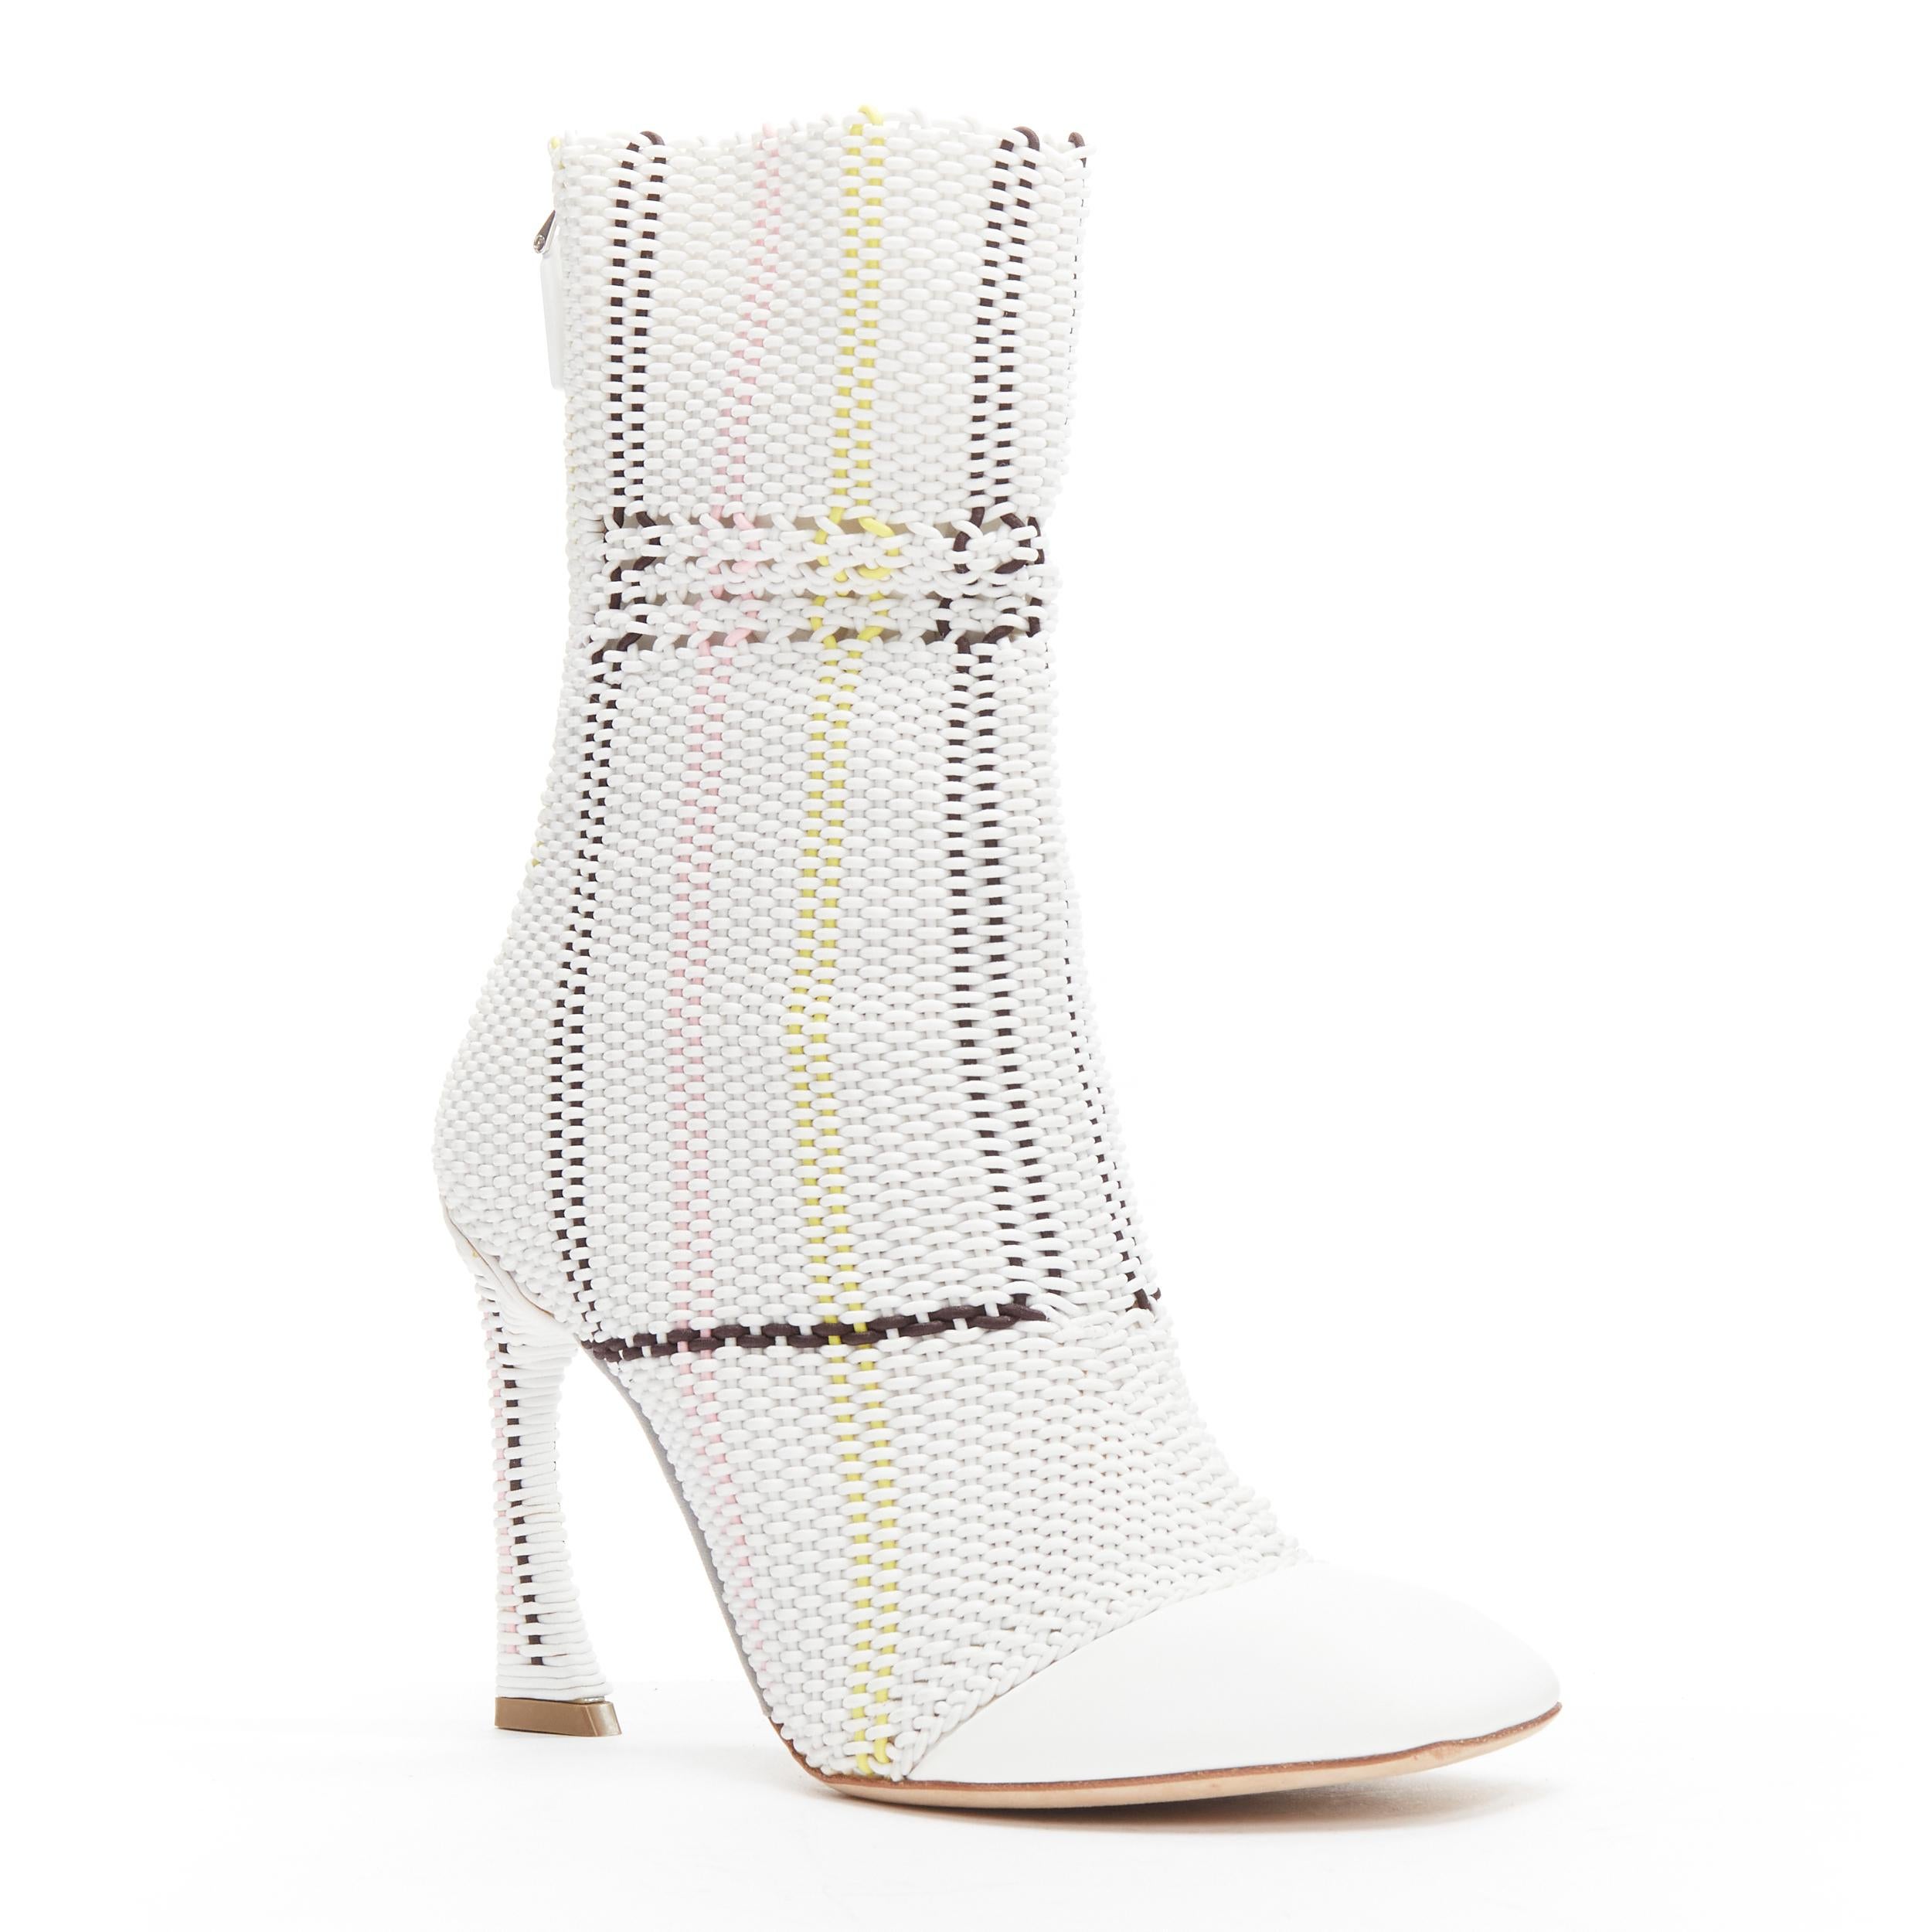 CHRISTIAN DIOR Raf Simons 2015 Runway white woven leather heeled boots EU36
Reference: TGAS/C01890
Brand: Christian Dior
Designer: Raf Simons
Collection: SS 2015 - Runway
Material: Leather
Color: White, Black
Pattern: Plaid
Closure: Zip
Extra